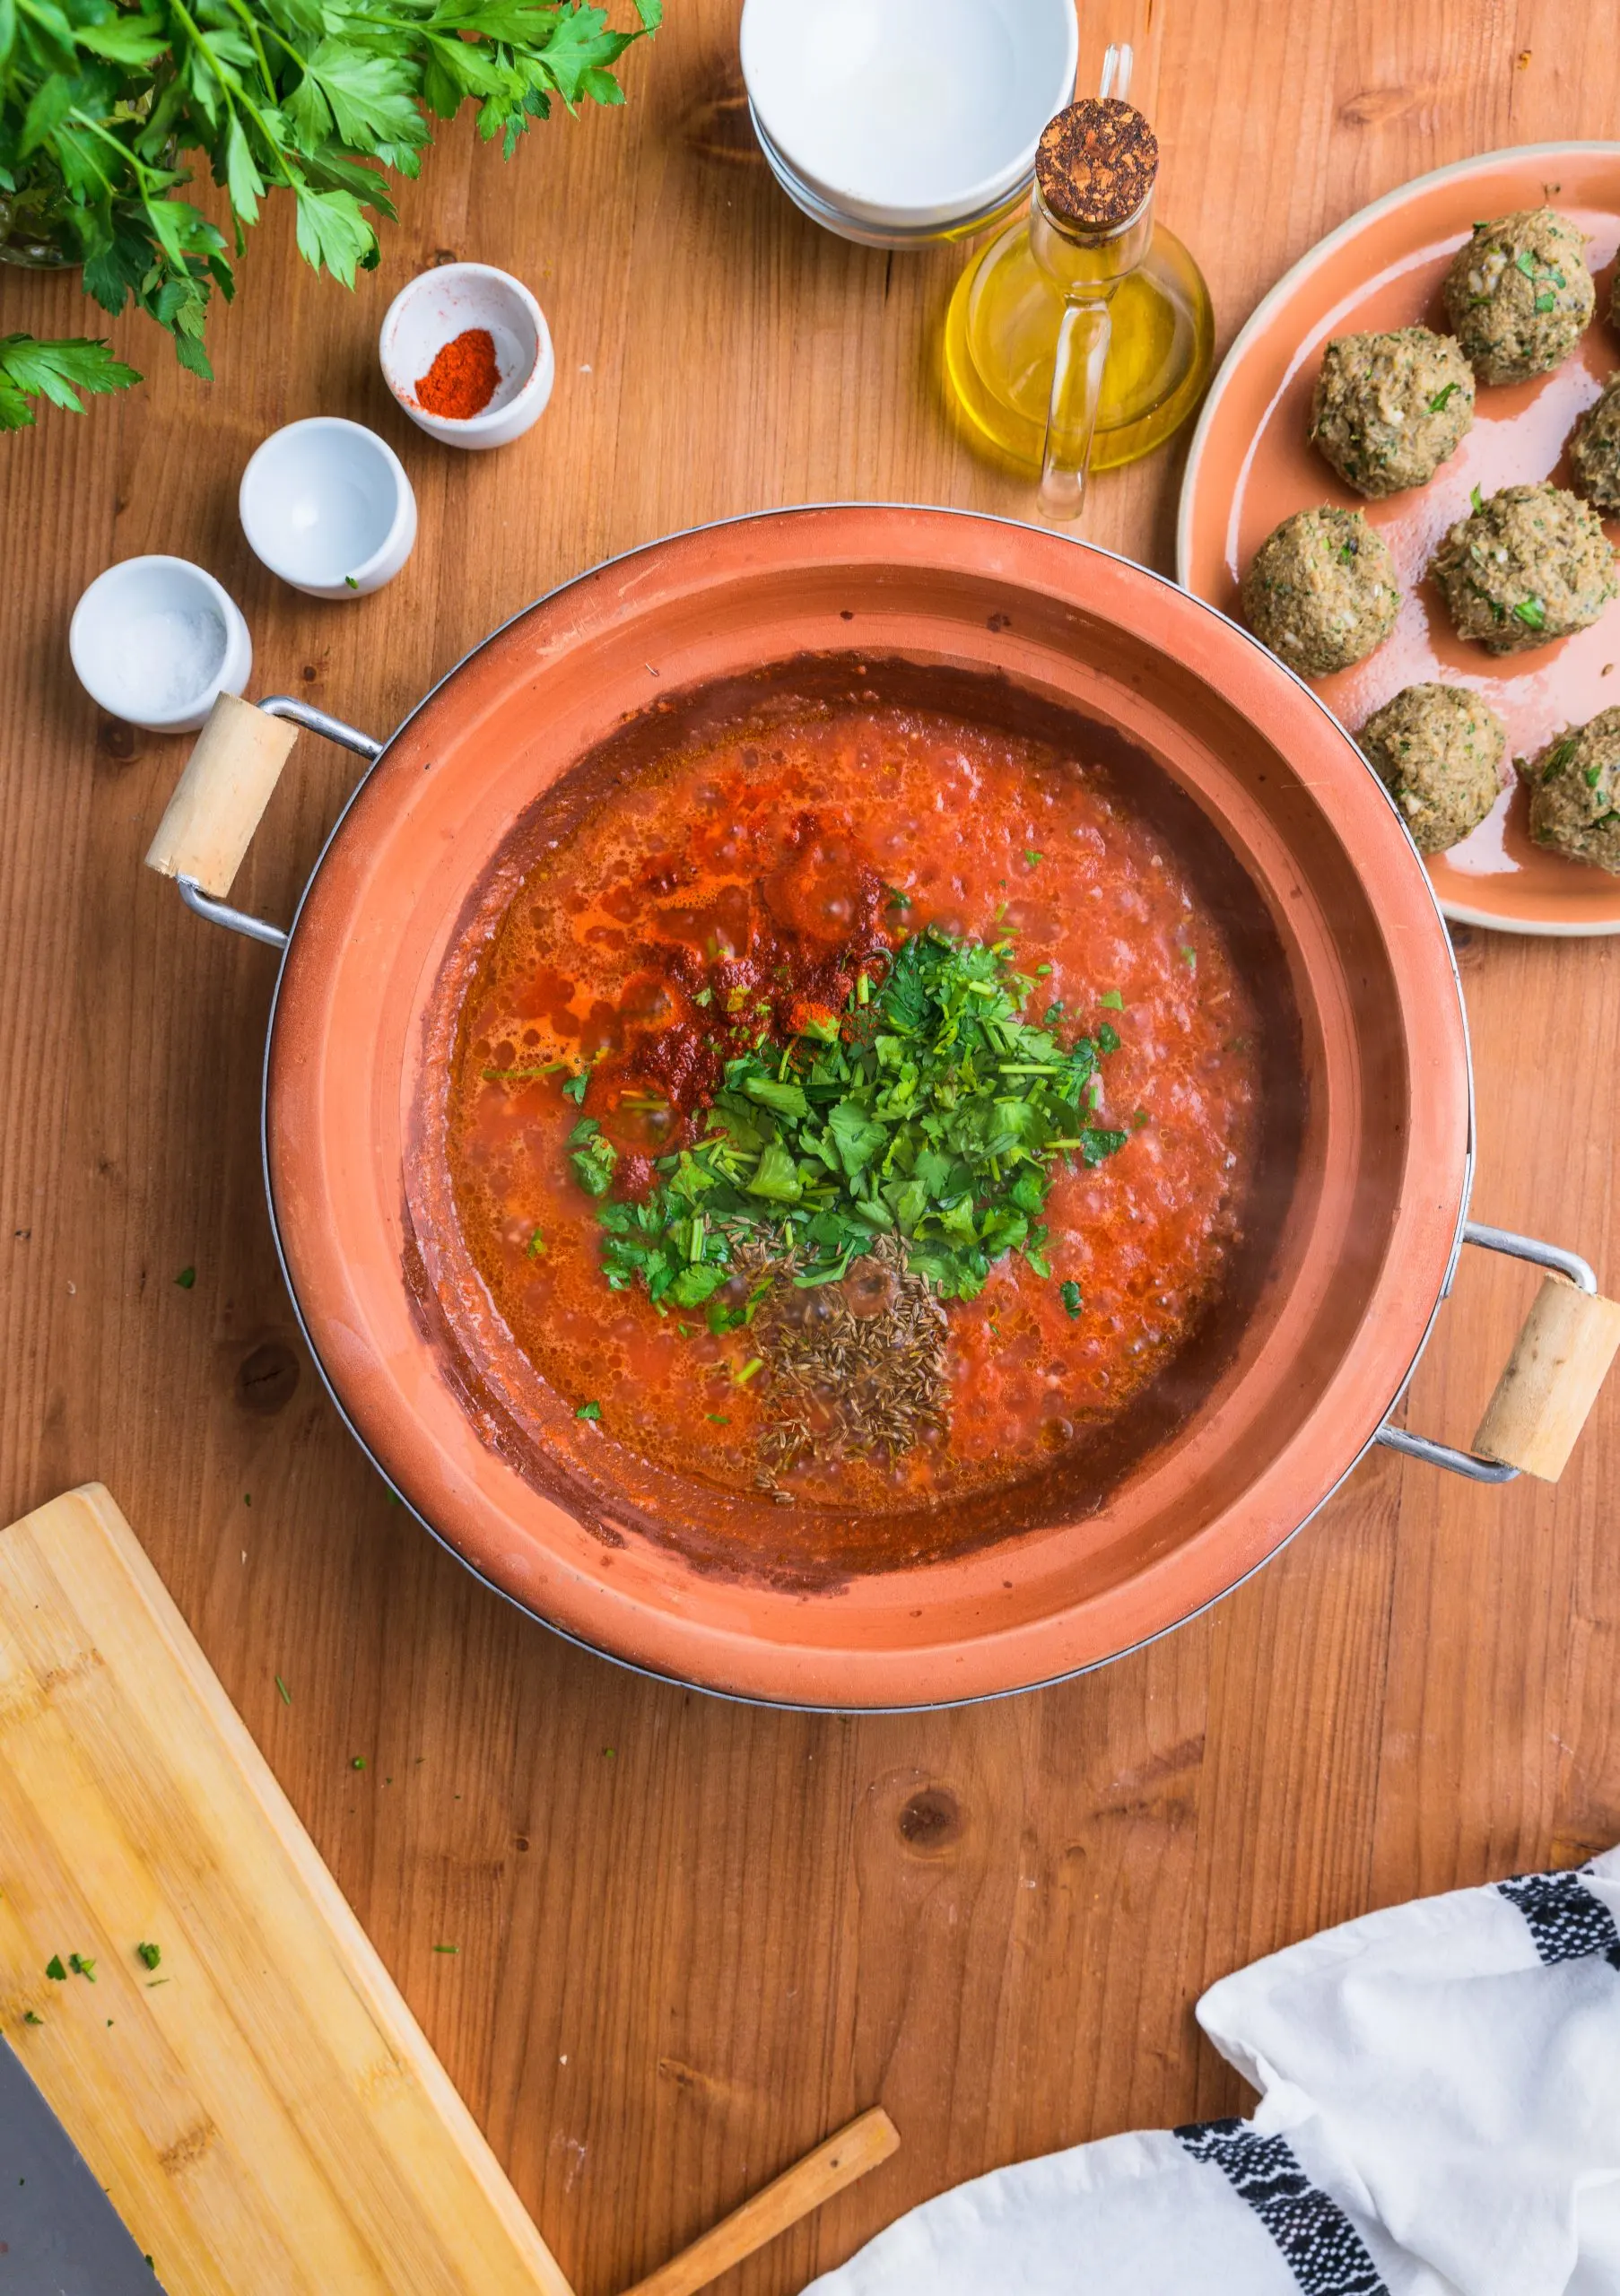 Adding herbs and spices to the Moroccan sardine meatballs tagine dish